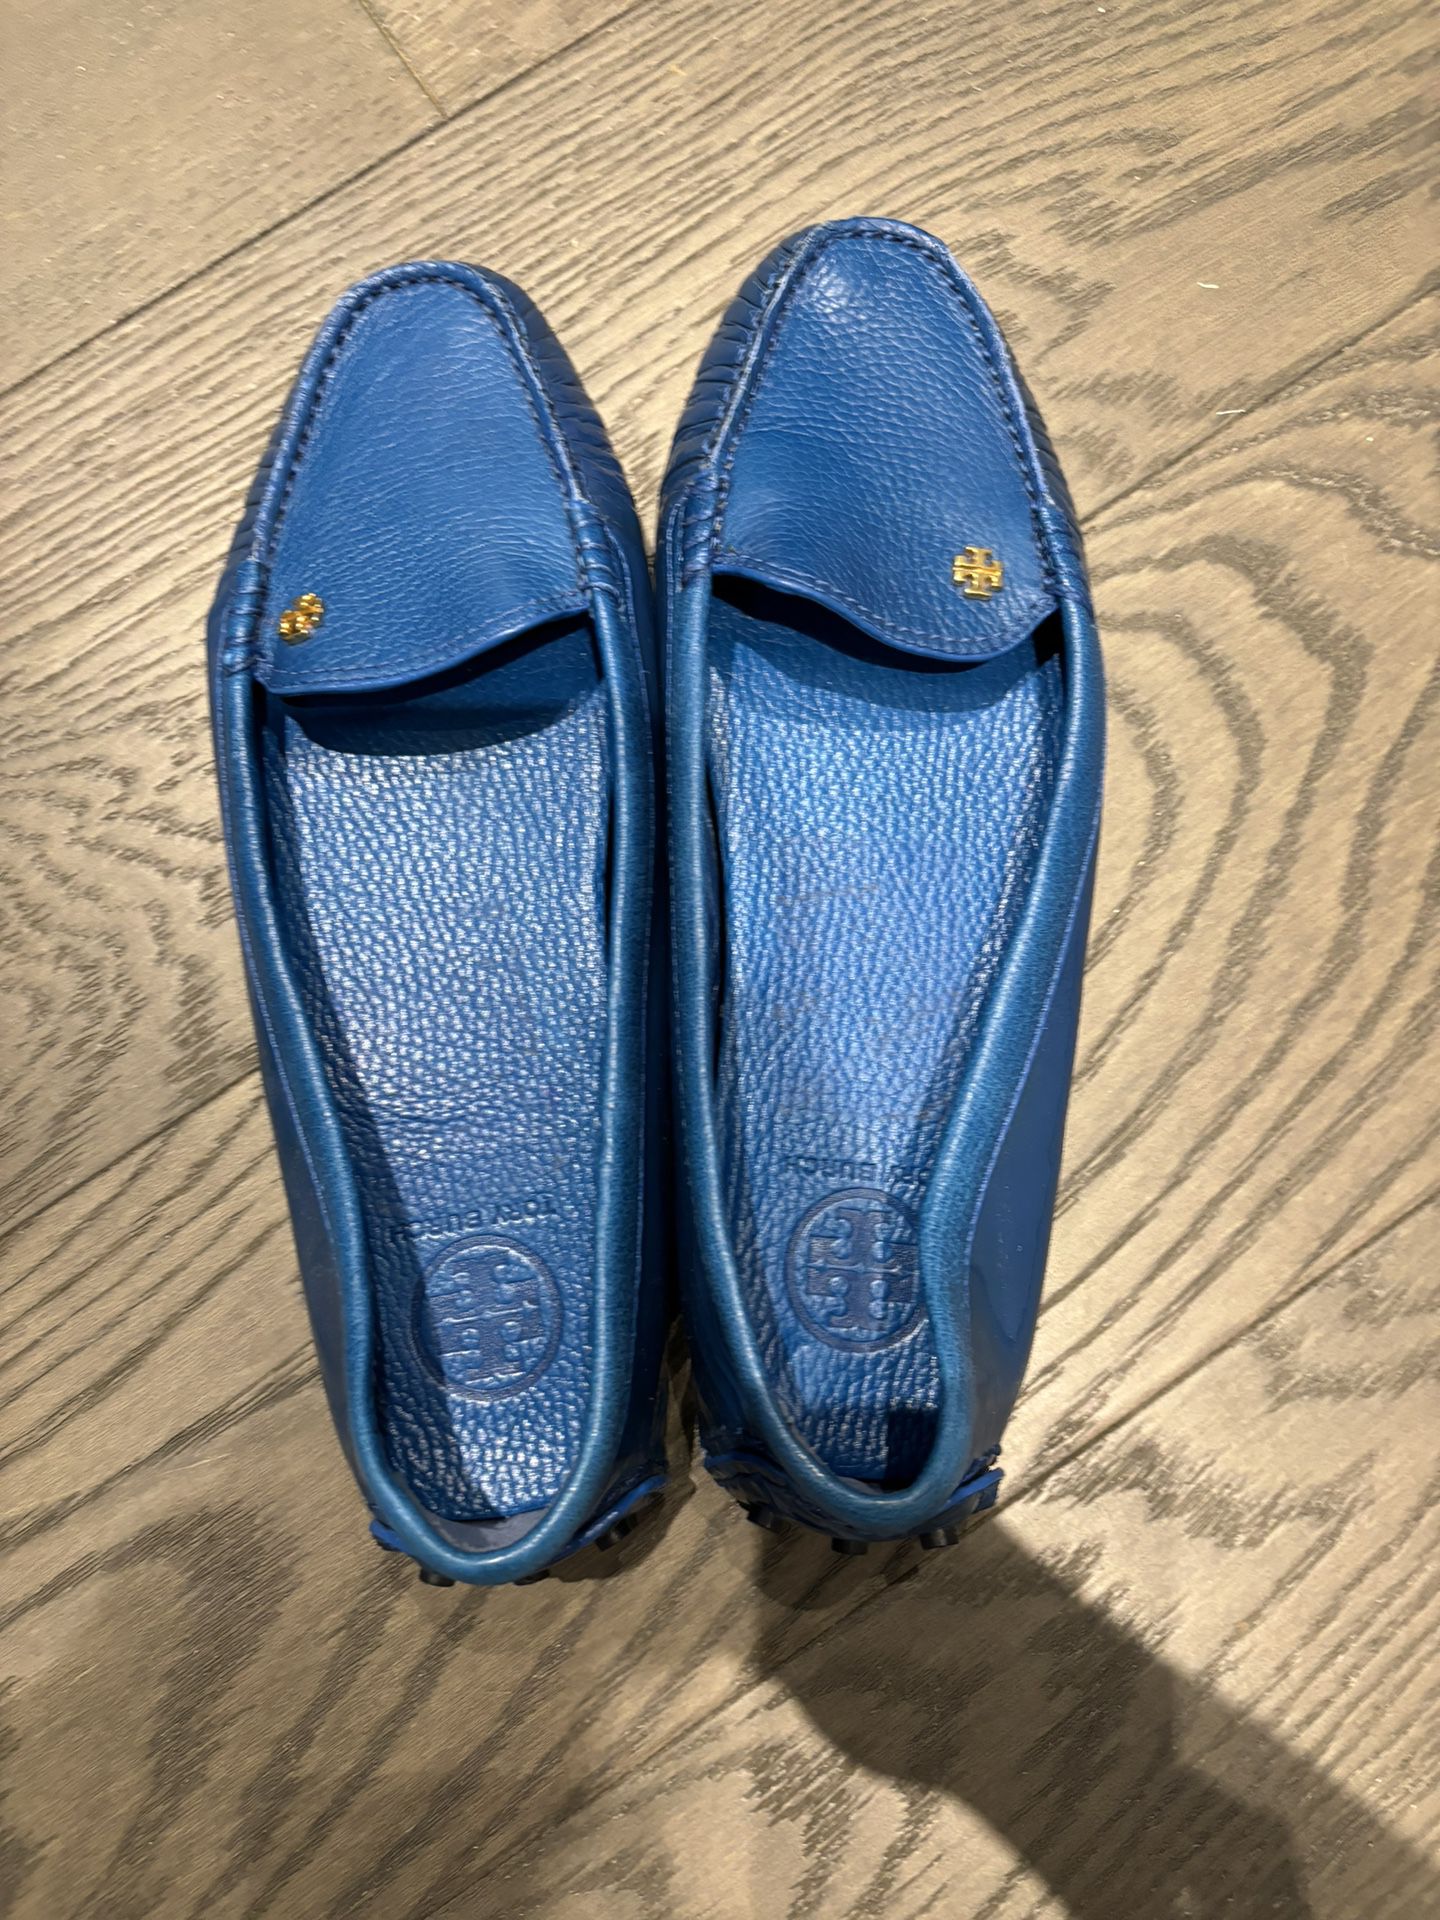 Tory Burch New Blue Loafers 